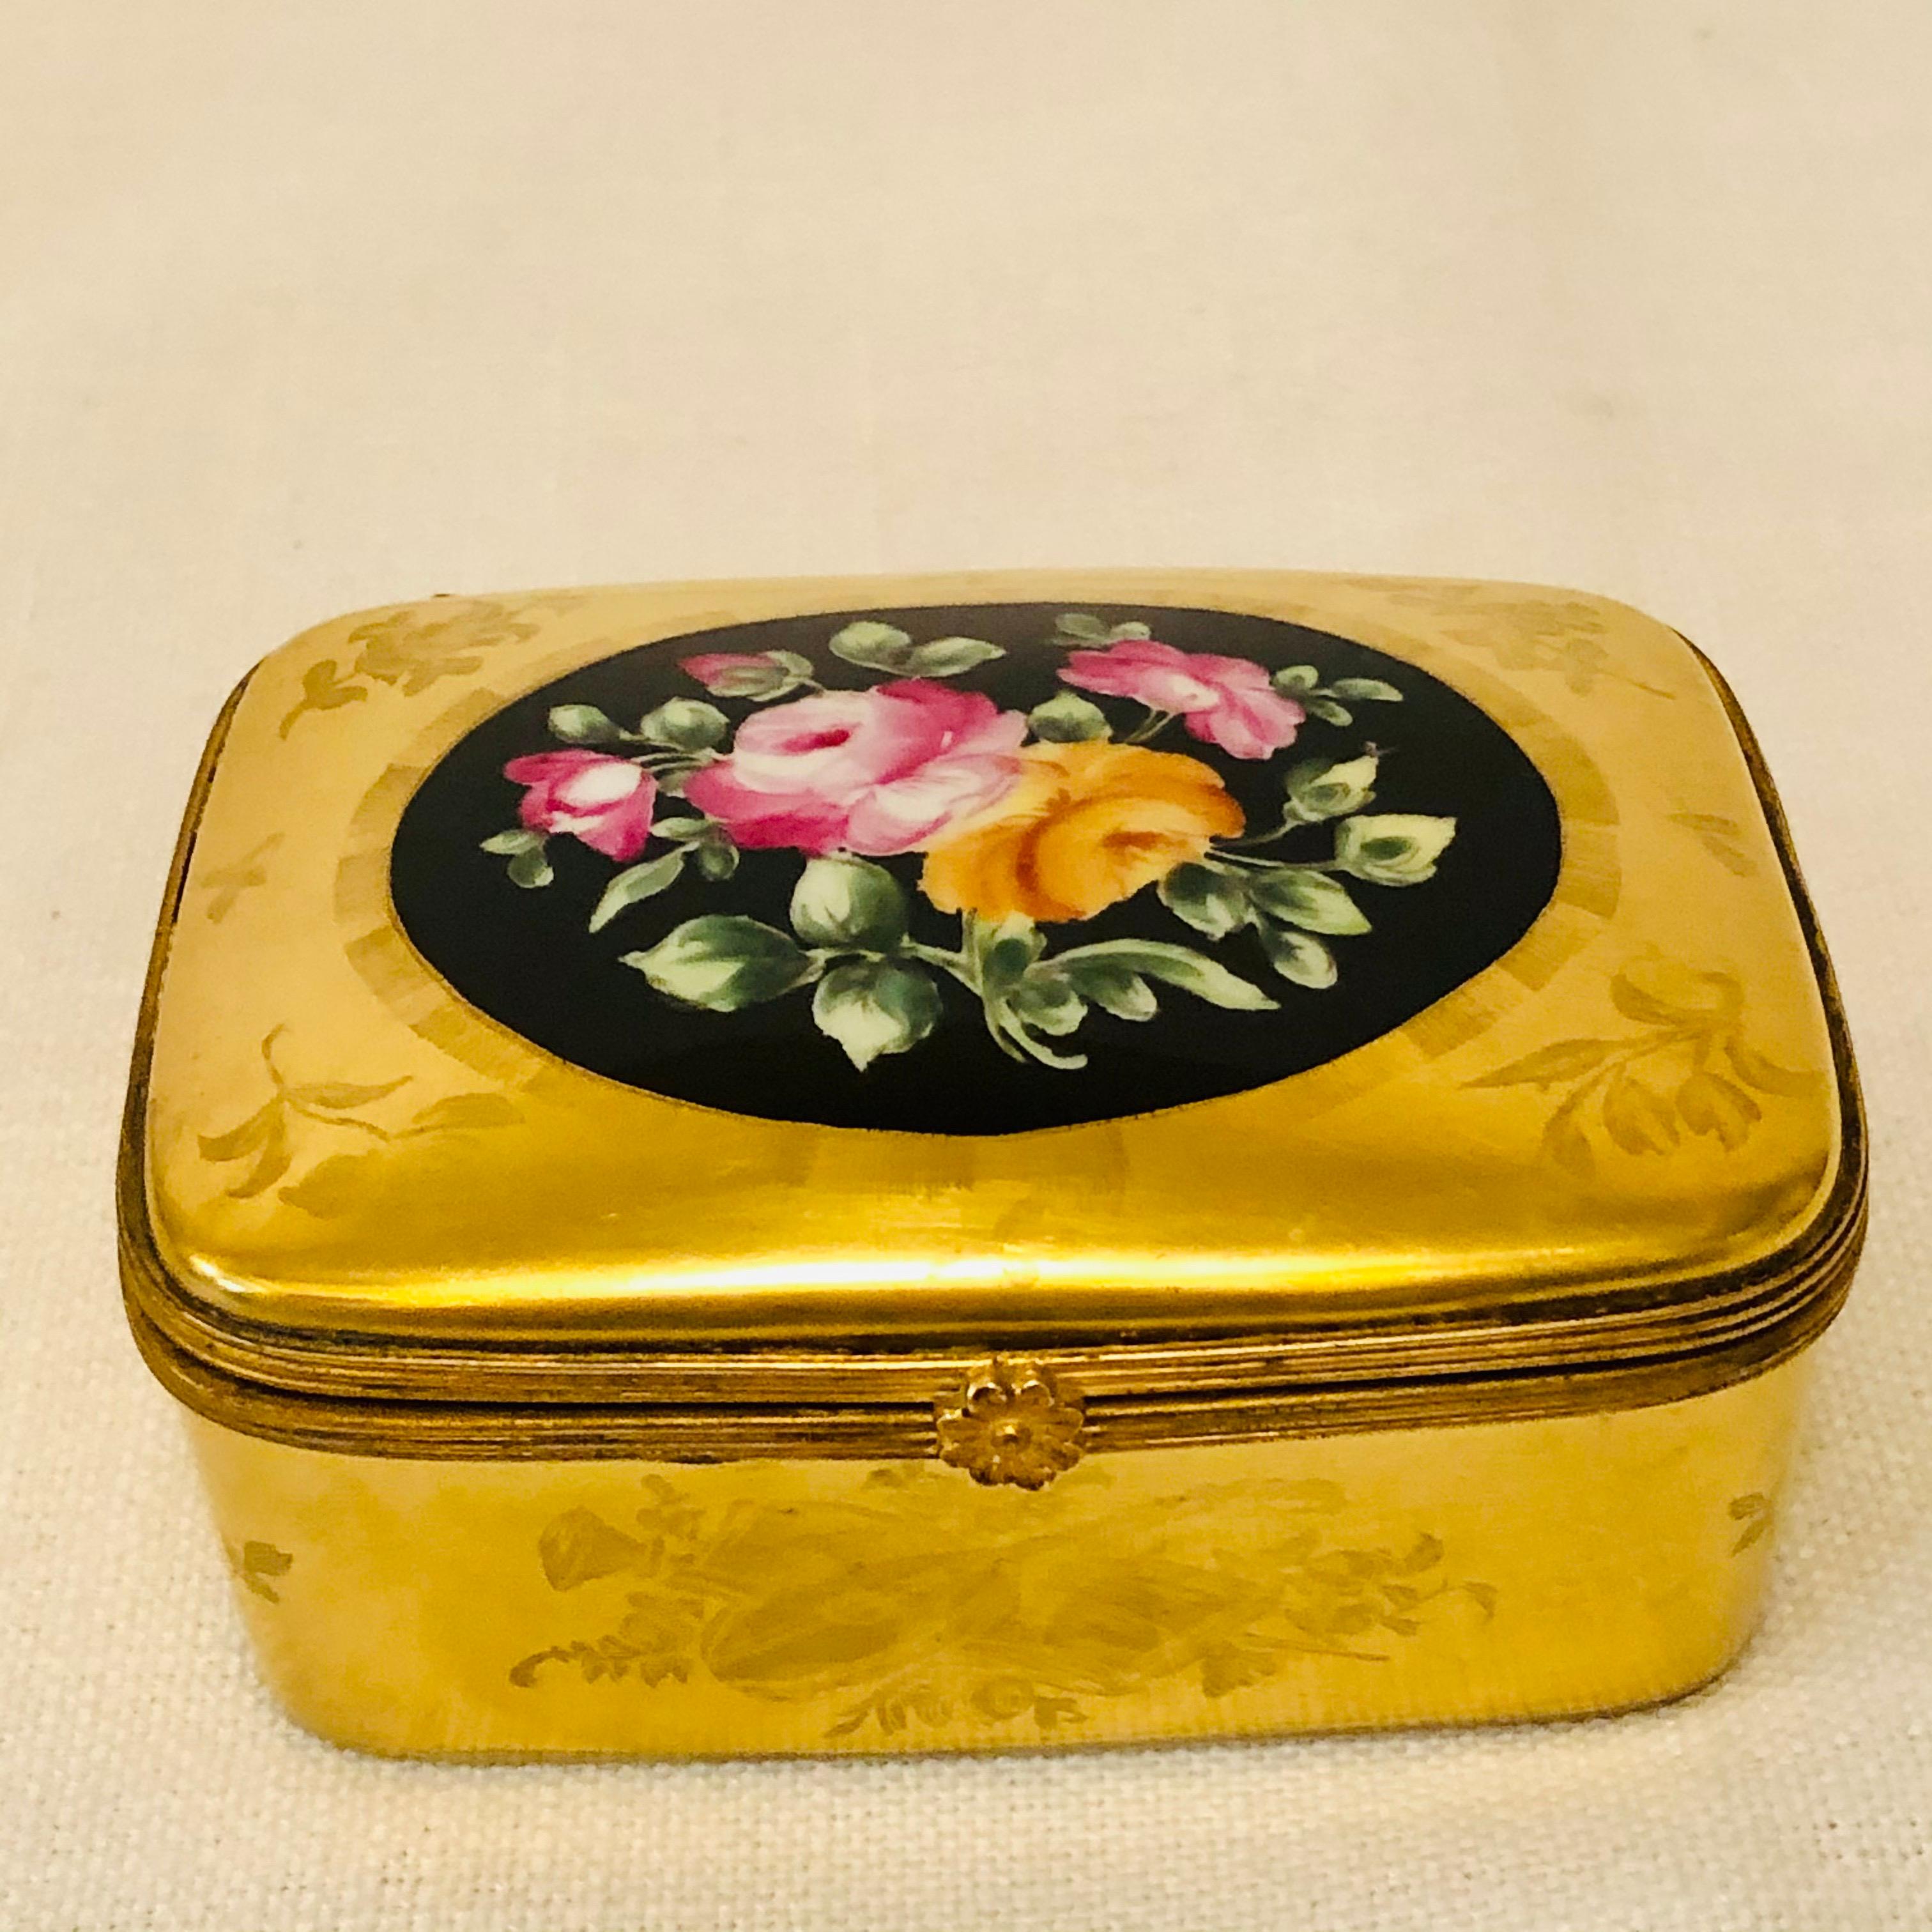 I want to offer you this fabulous Le Tallec porcelain box with a gold background. The gold background is painted with gold flowers and French emblems, like the one on the front depicting music. In the center top of the box is a lovely colorful